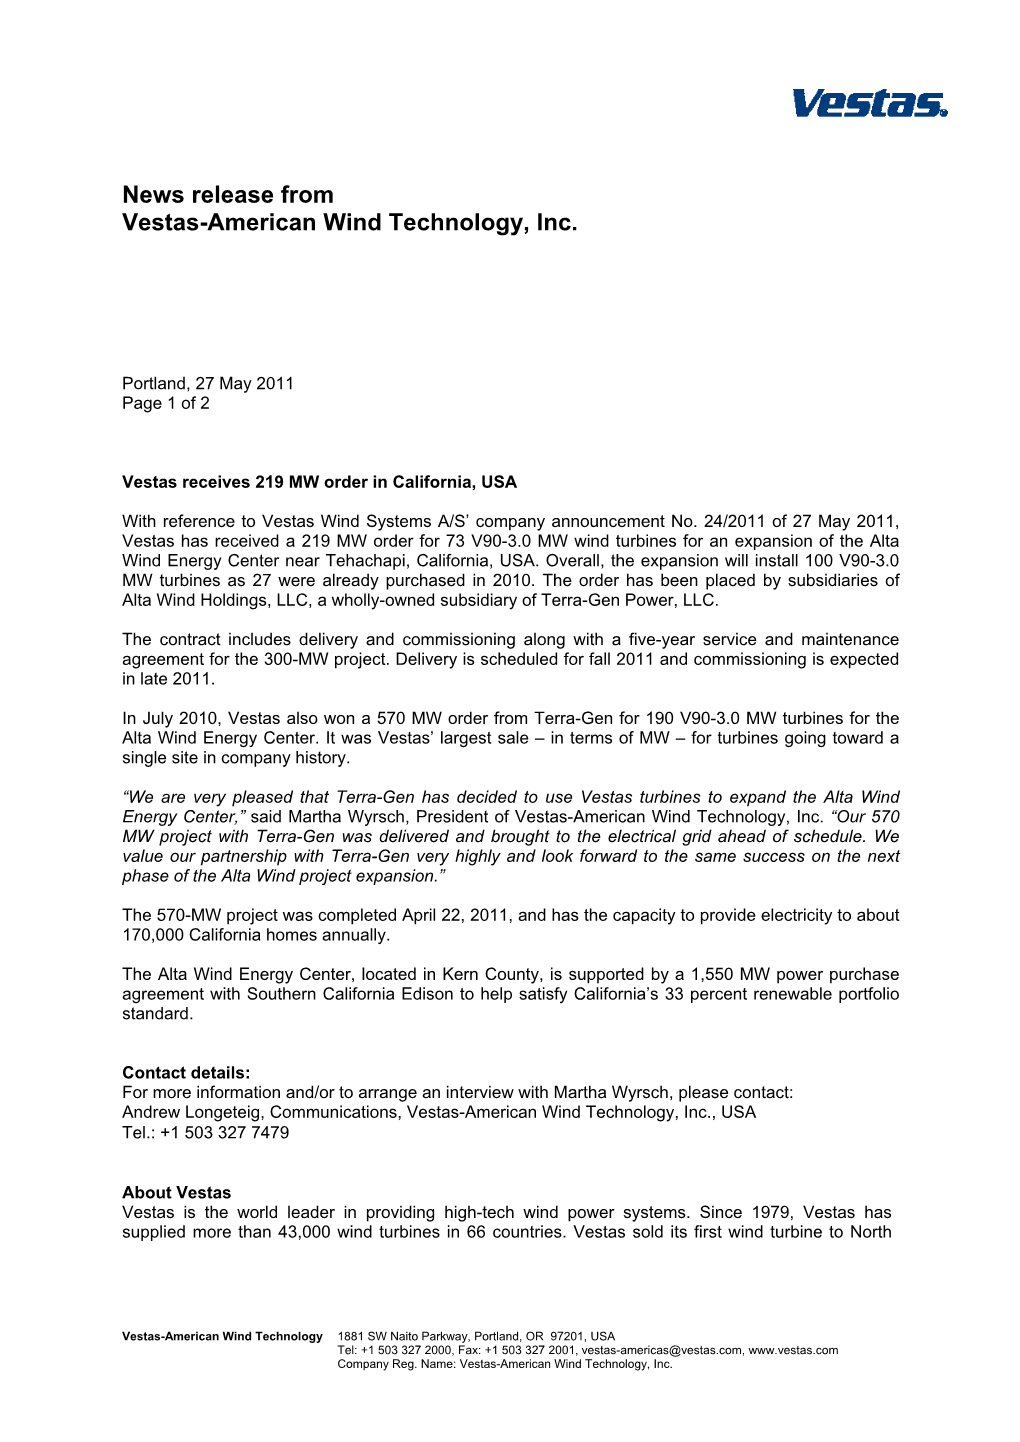 News Release from Vestas-American Wind Technology, Inc